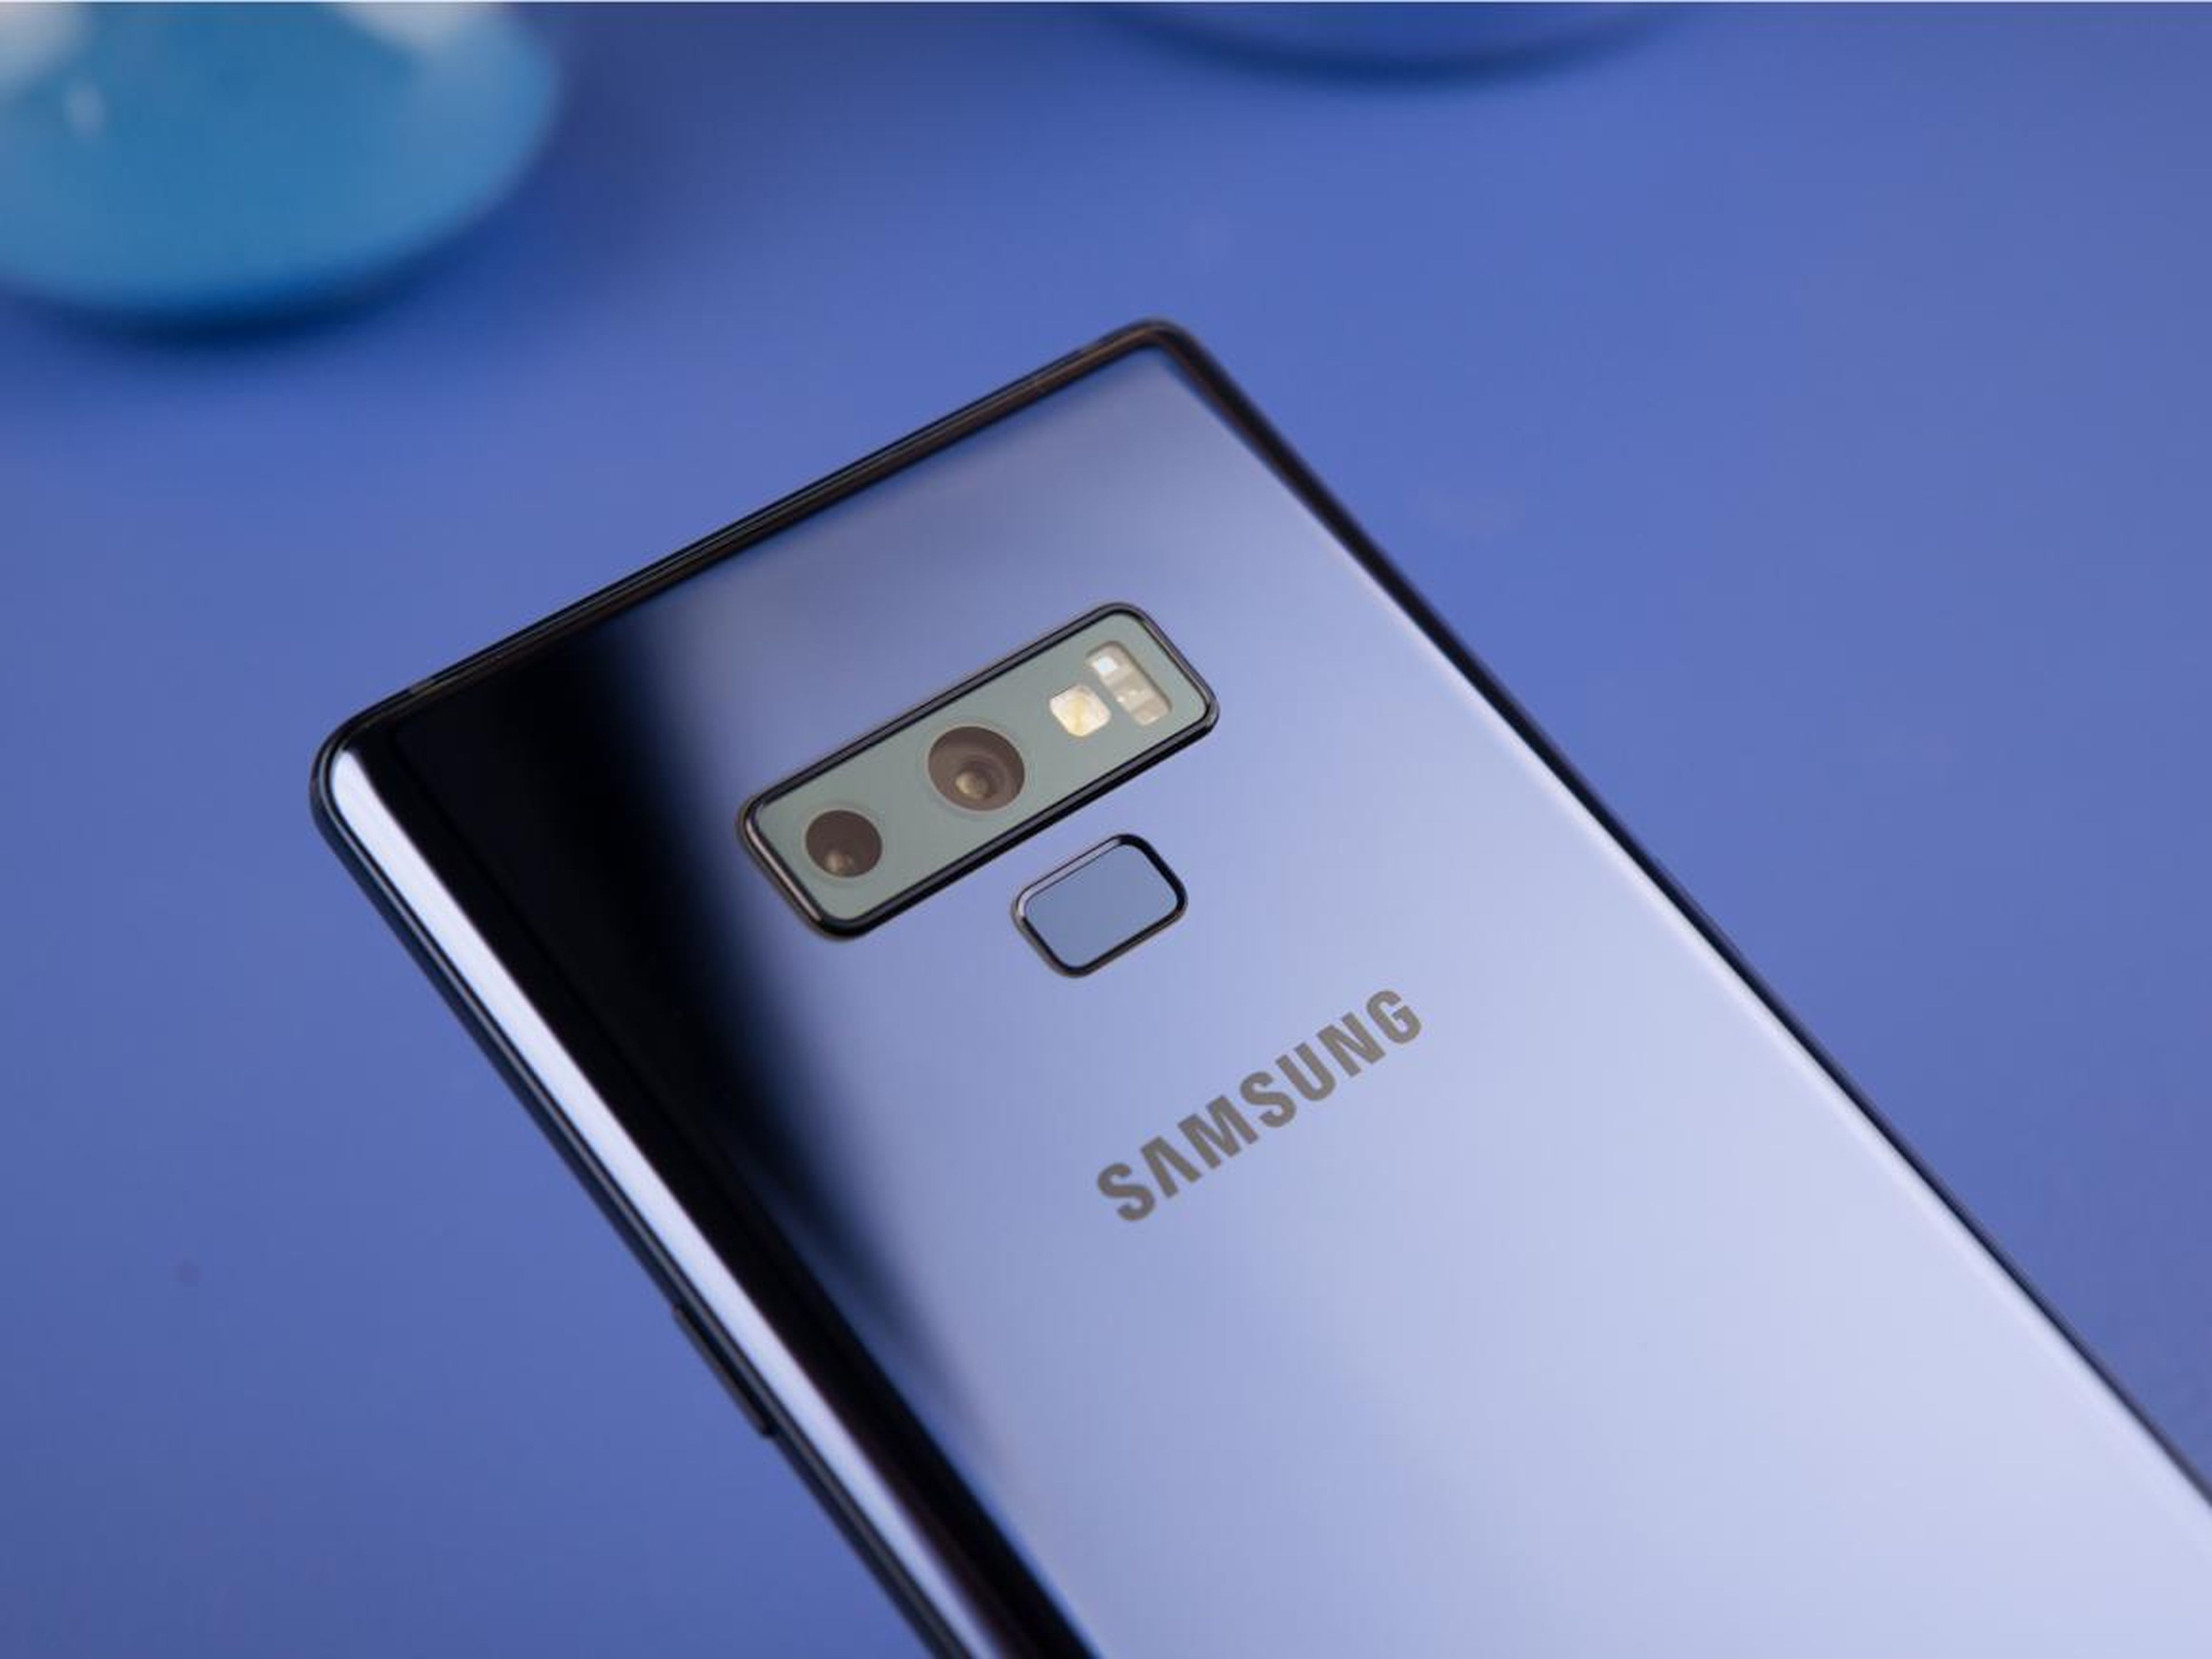 The Galaxy Note 9 comes with a fingerprint scanner as well as facial recognition.